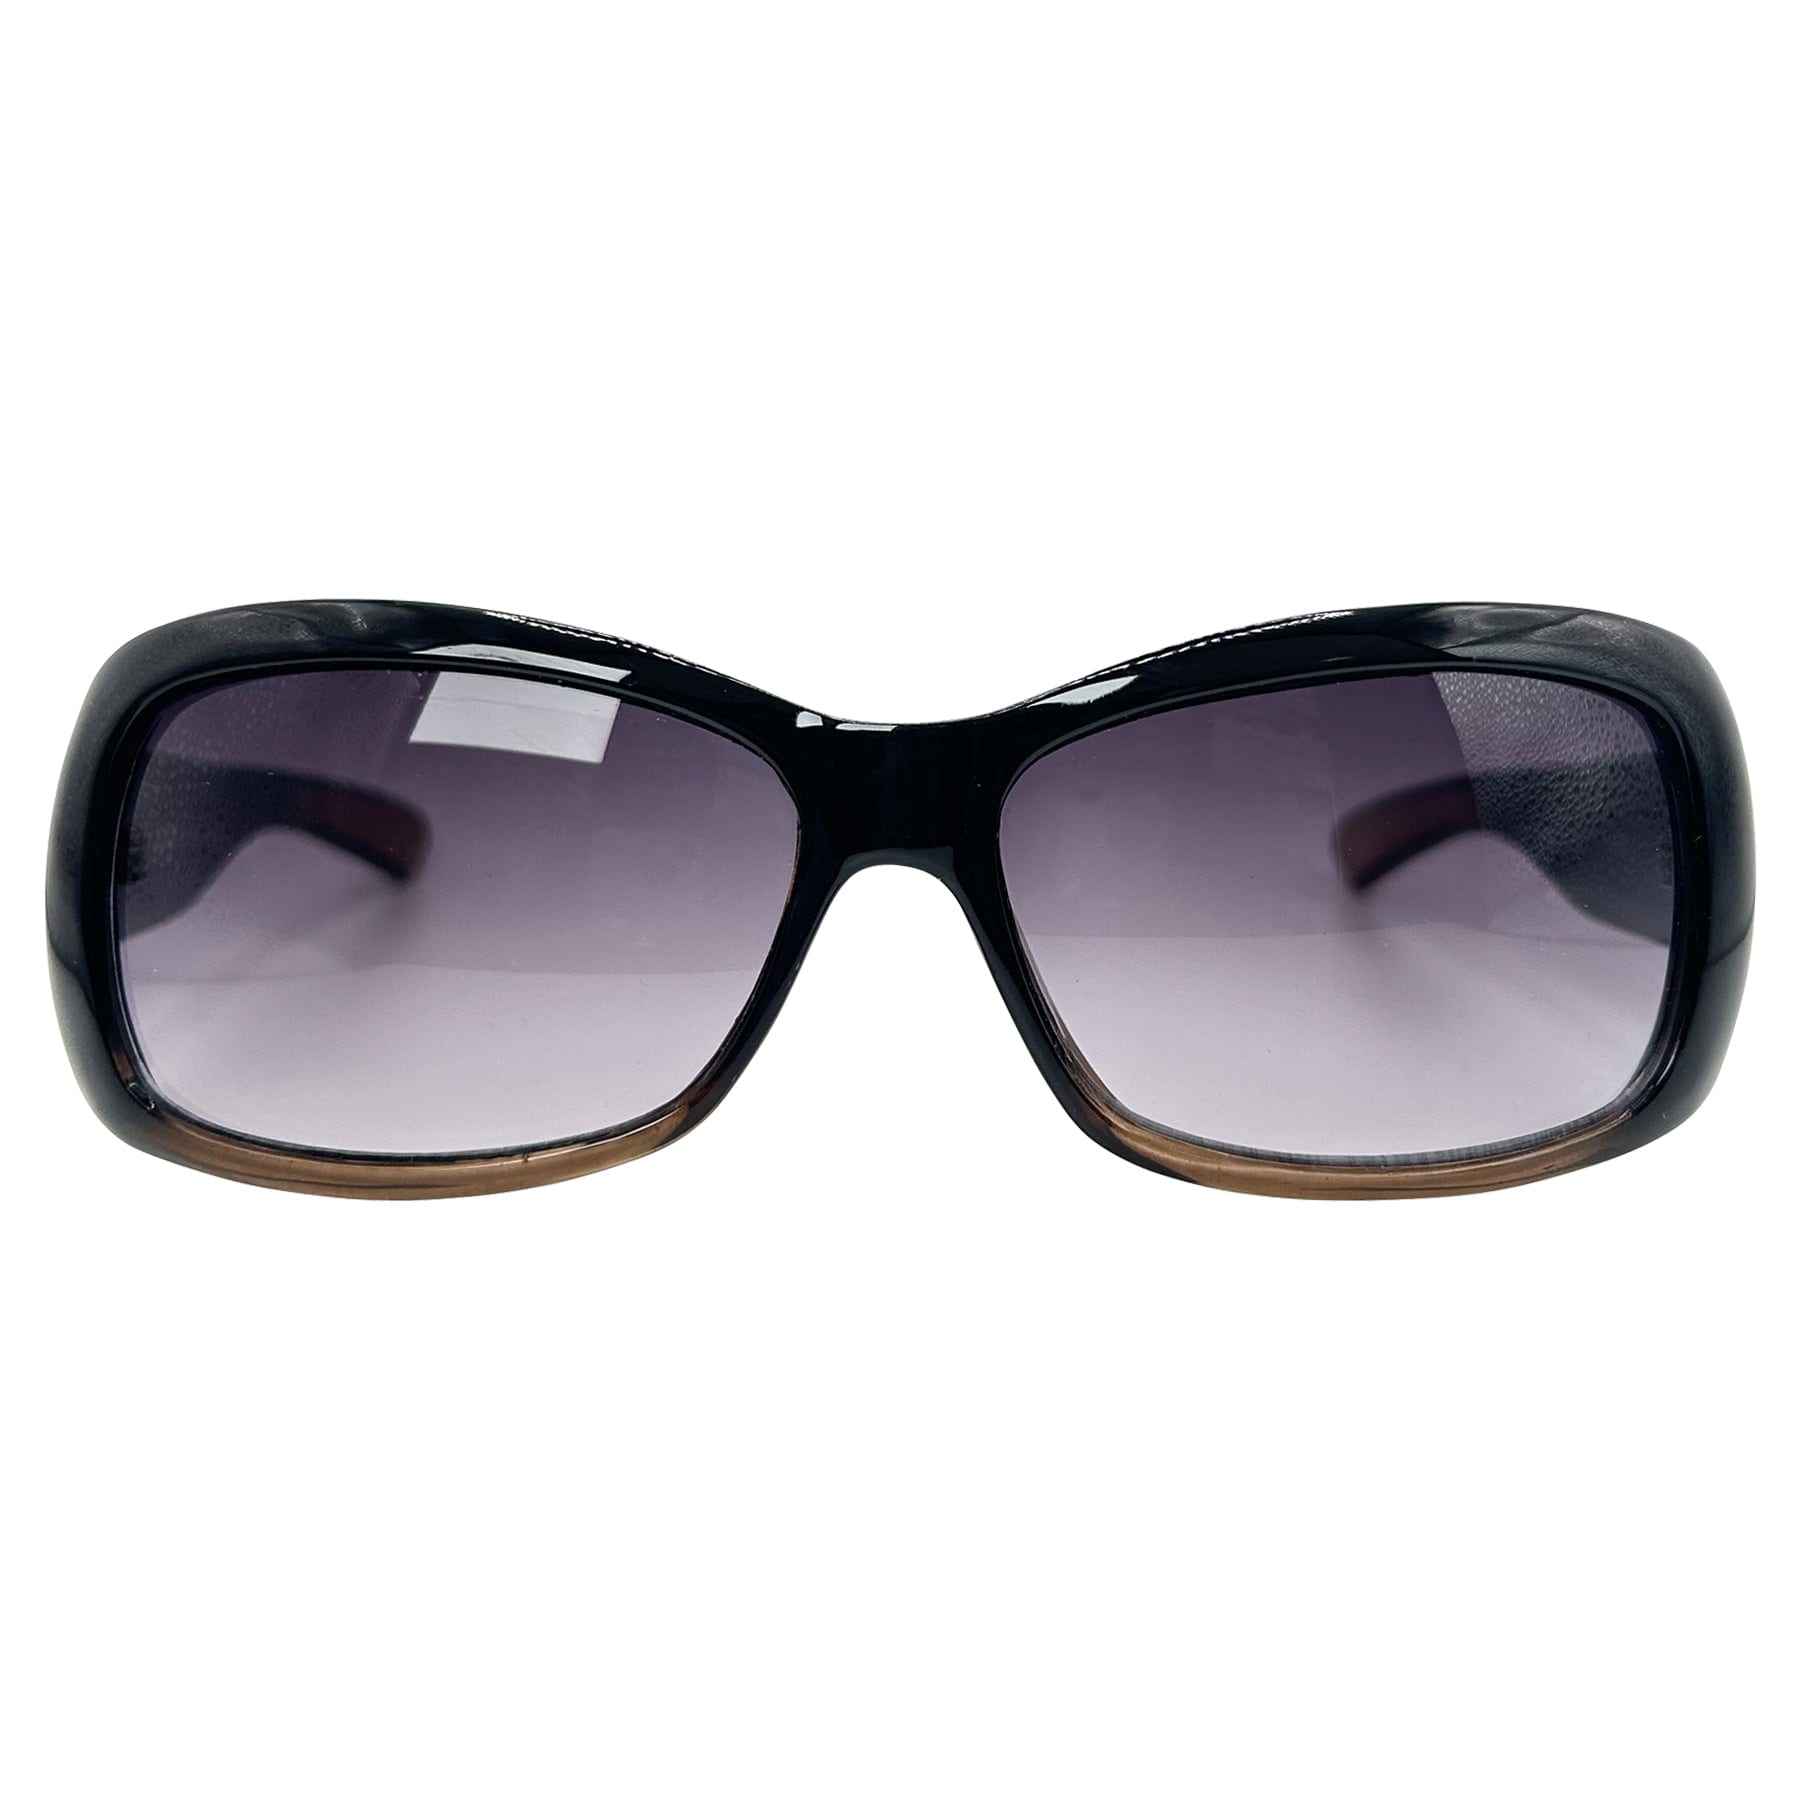 90s retro sunglasses with a square shape and wraparound style